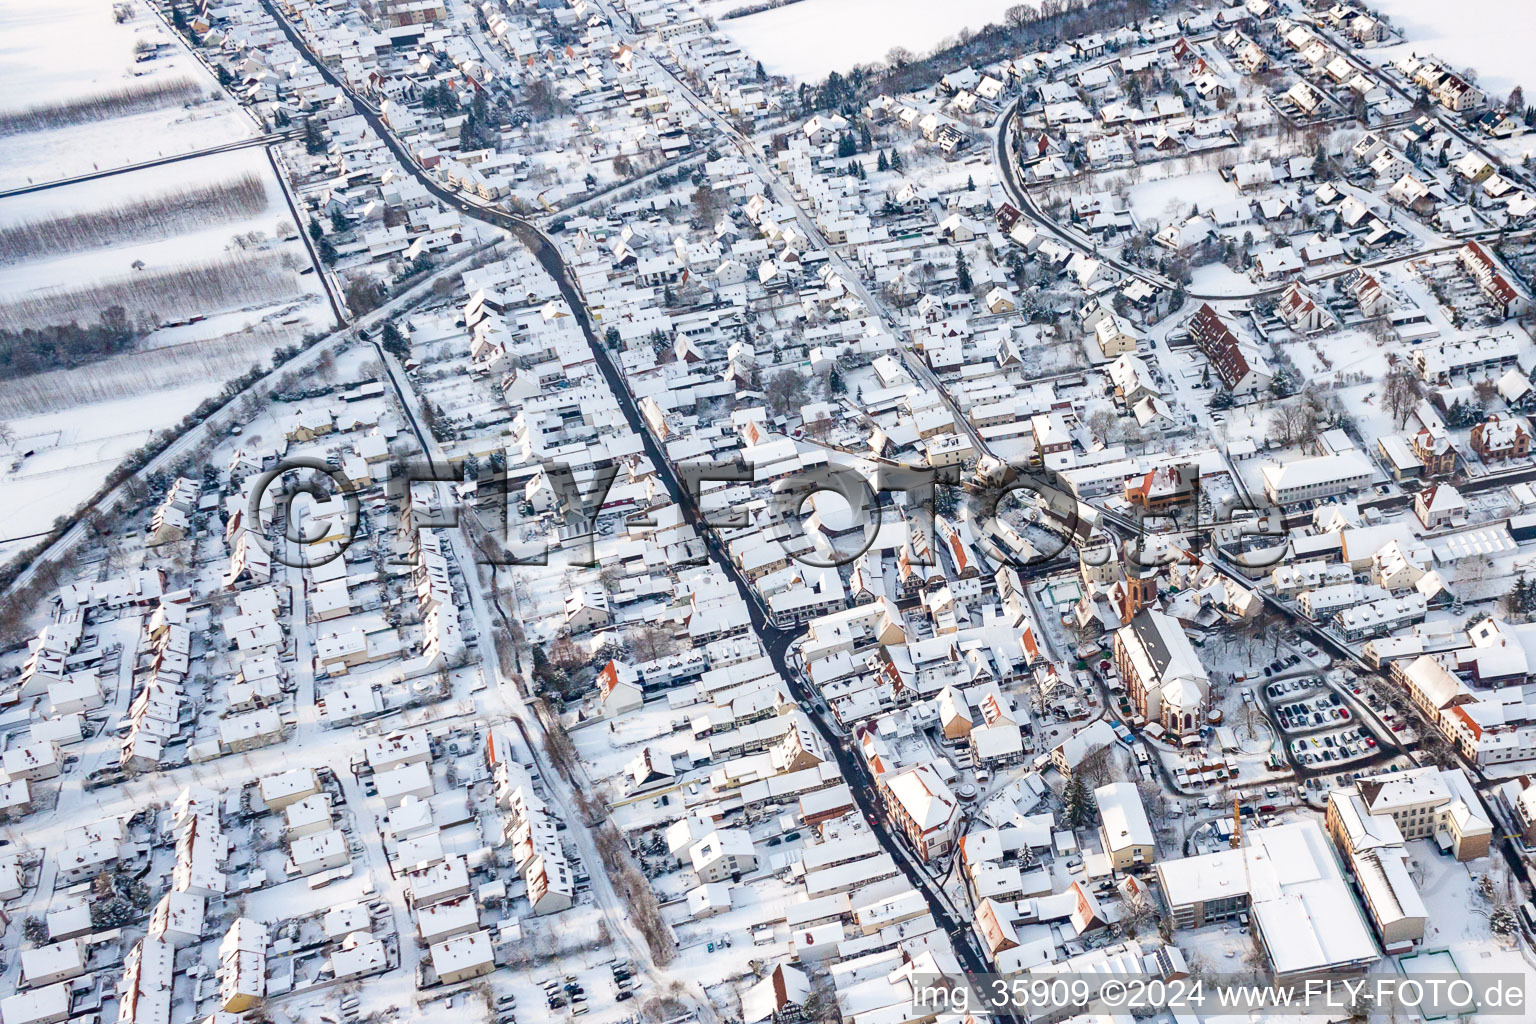 Bird's eye view of In the snow in Kandel in the state Rhineland-Palatinate, Germany